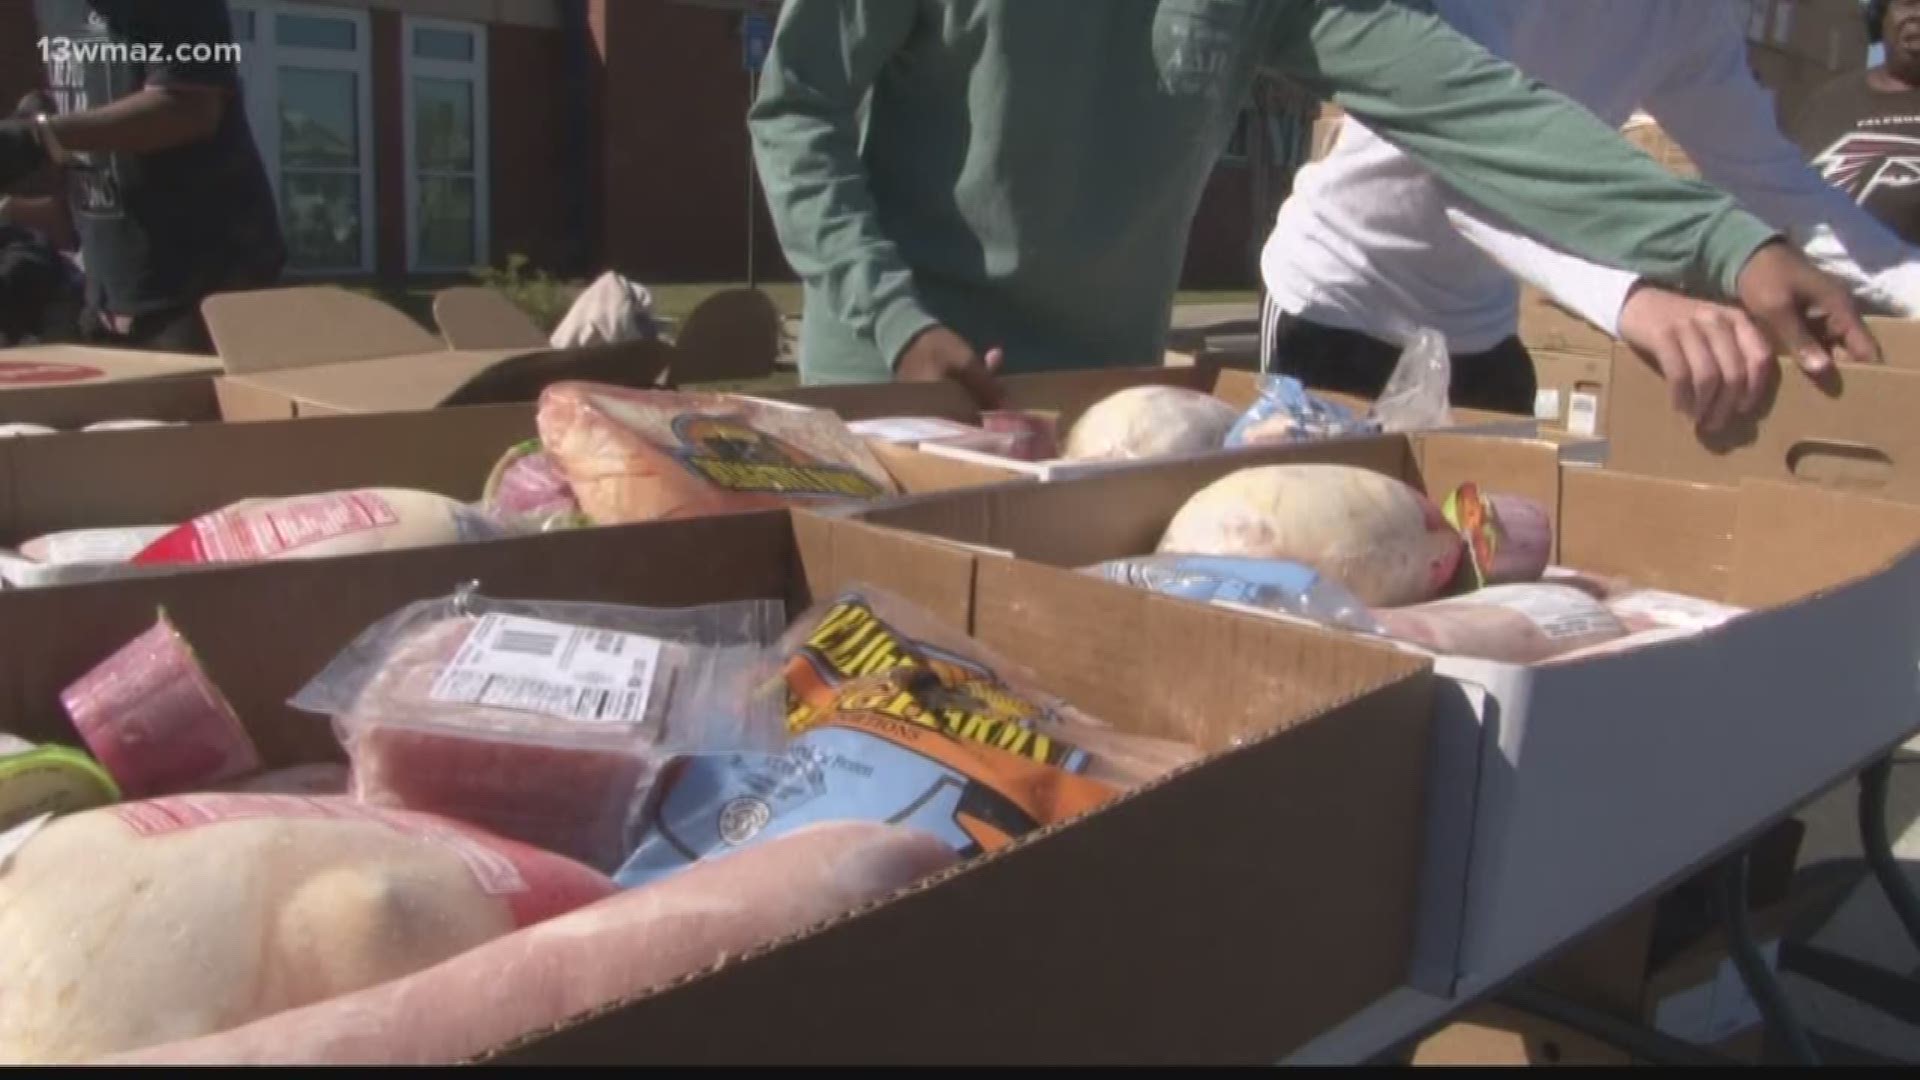 The Middle Georgia Community Food Bank partnered up with the Boys and Girls Club of Central Georgia and the Macon-Bibb Housing Authority to hand out food on Saturday. They'll be in Hawkinsville on Monday at Blessed Community on Woodrow Miller Drive at 11 a.m.